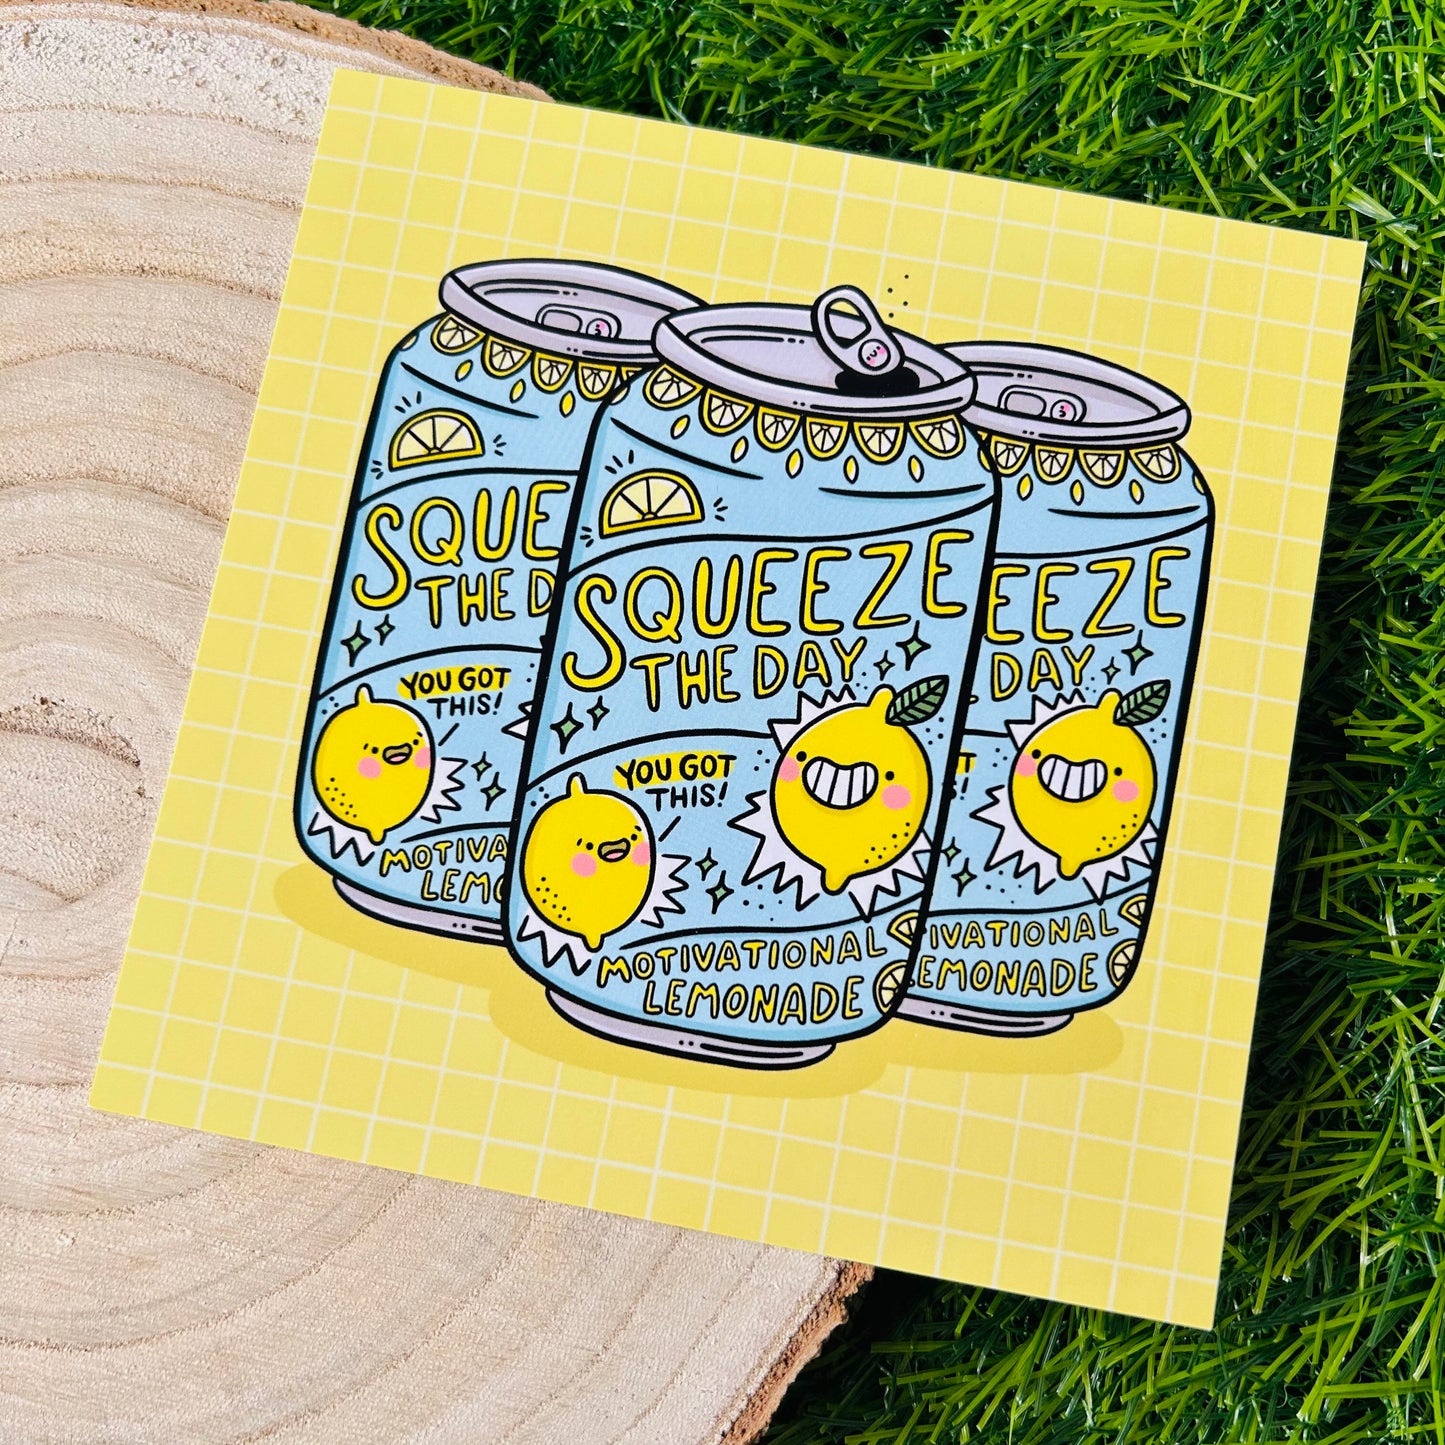 Squeeze The Day - Motivational Lemonade - Square Print